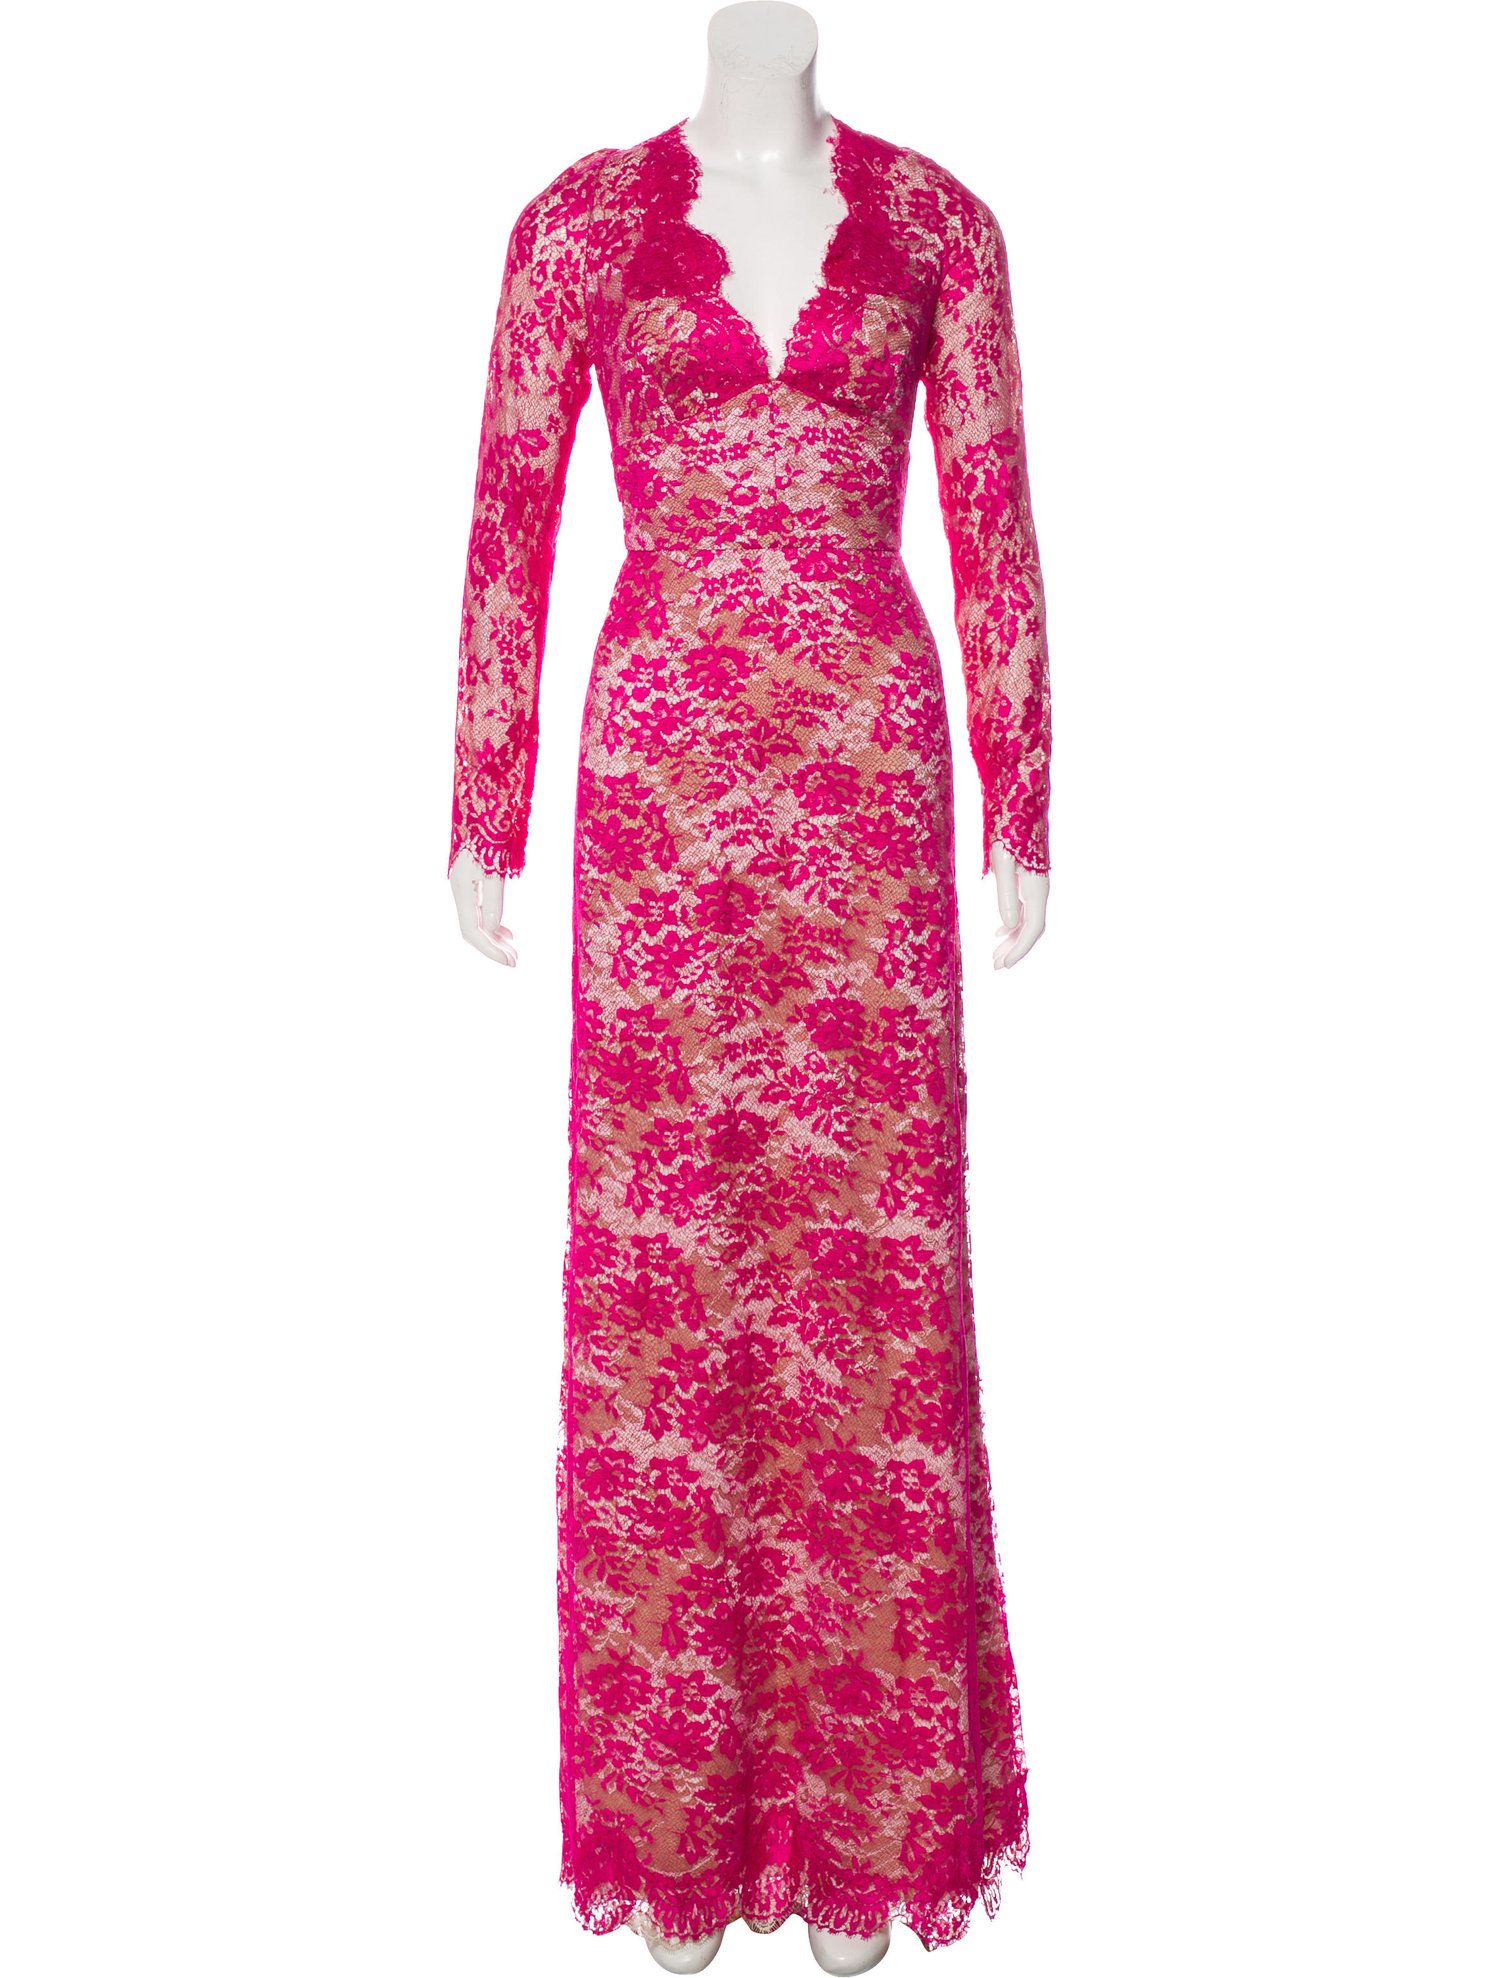 Fuchsia Monique Lhuillier Gown, $675 @therealreal.com